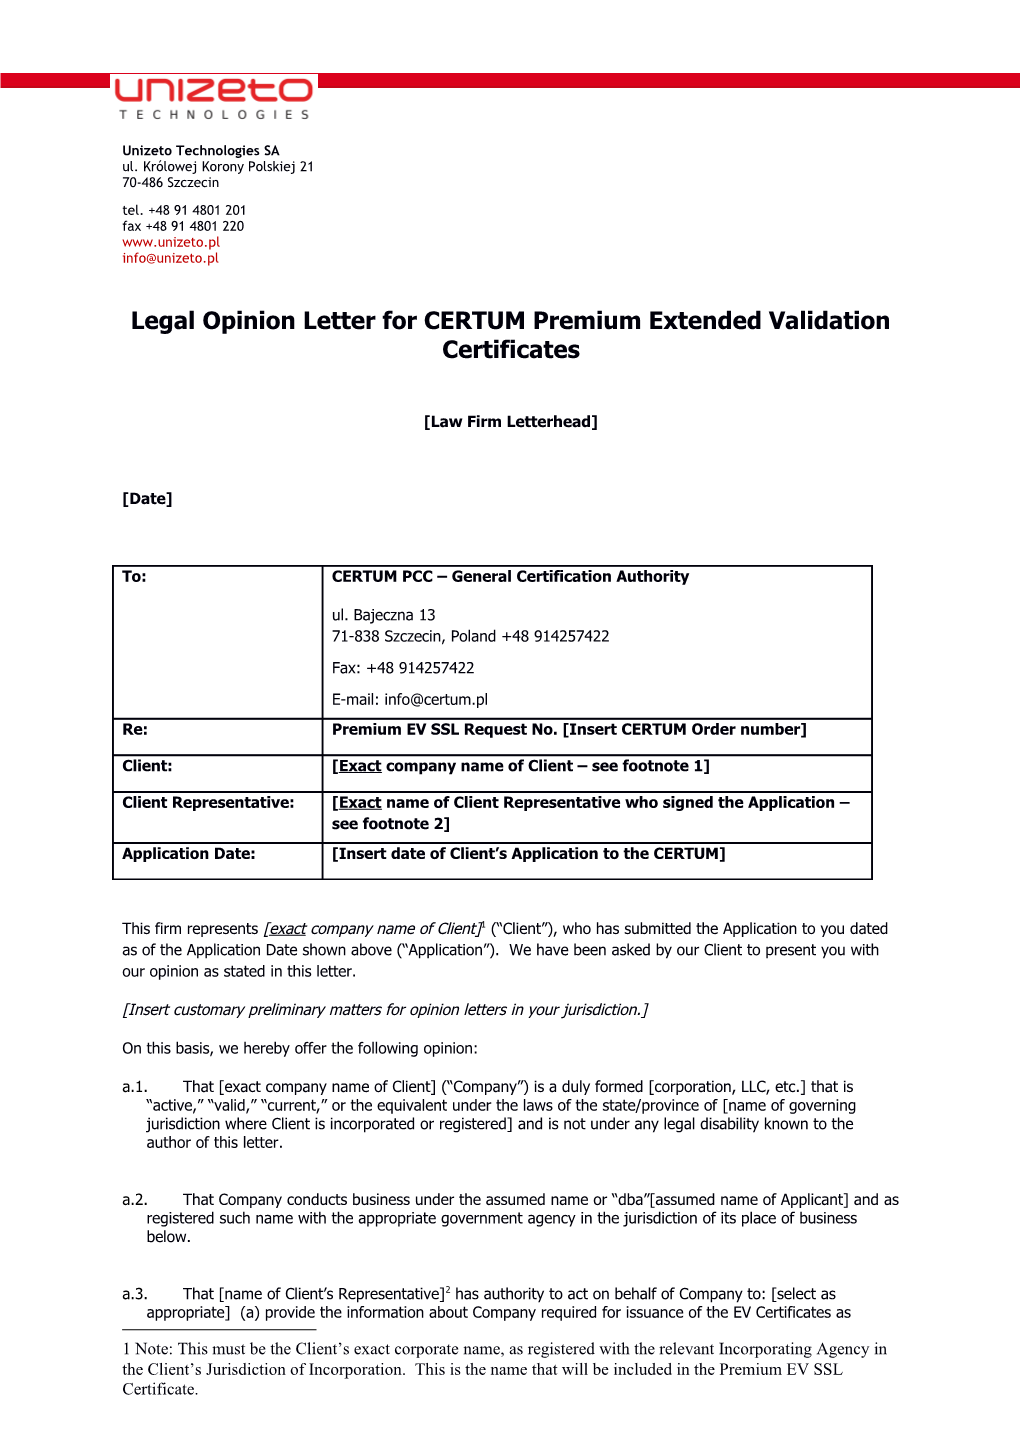 Legal Opinion Letter for CERTUM Premium Extended Validation Certificates